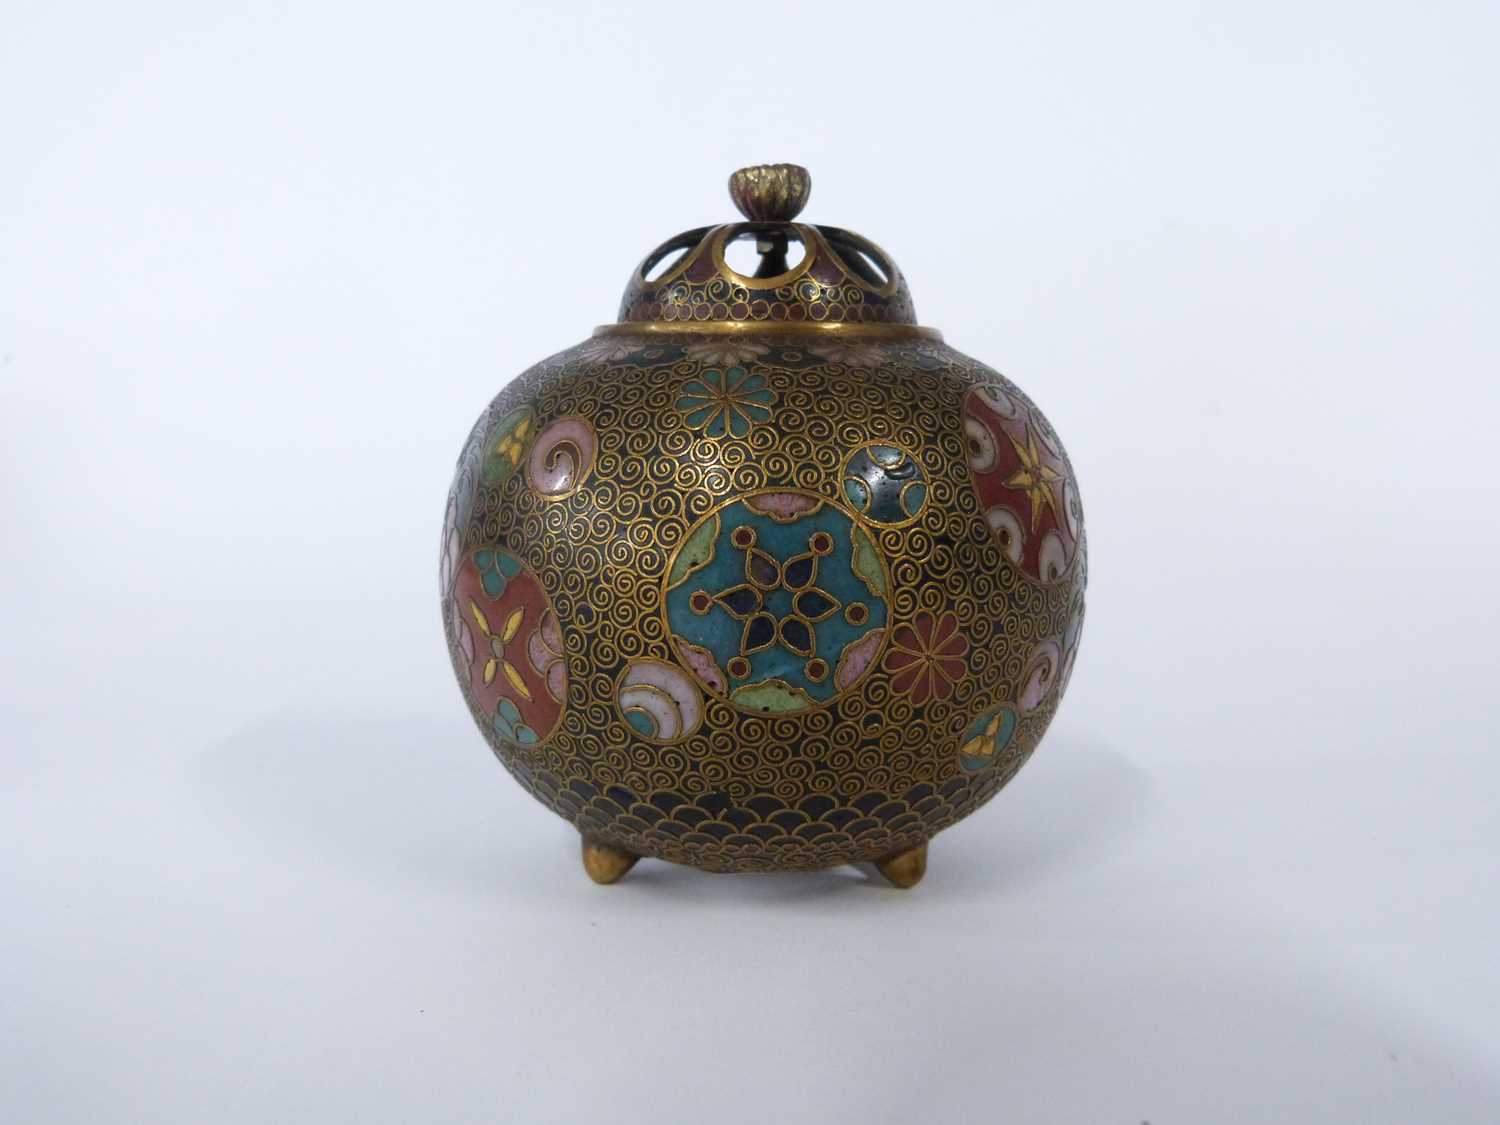 Cloisonne incense burner of globular form with pierced cover together with a small Cloisonne jar and - Image 3 of 36